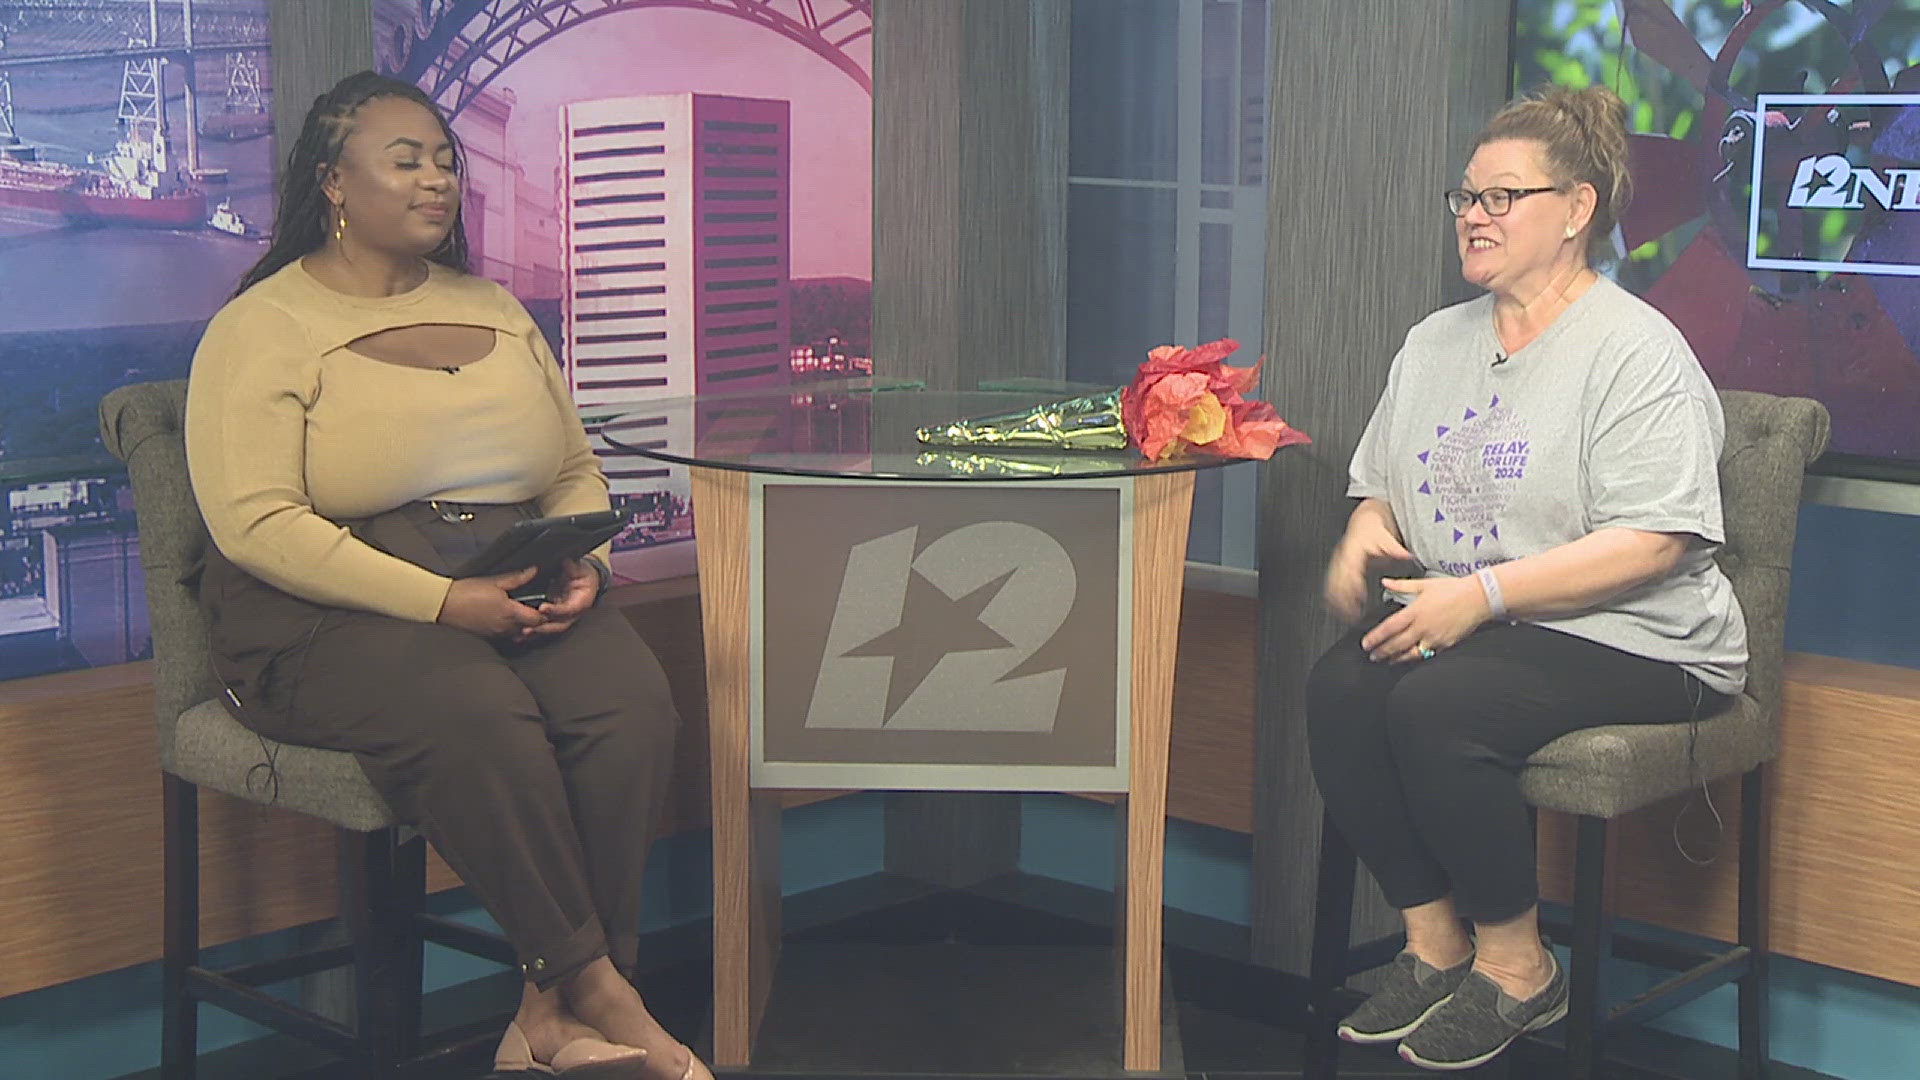 Co-Chair for Relay For Life Elli Jordan joins Midday to preview the upcoming fundraiser meant to help fight cancer in Southeast Texas.